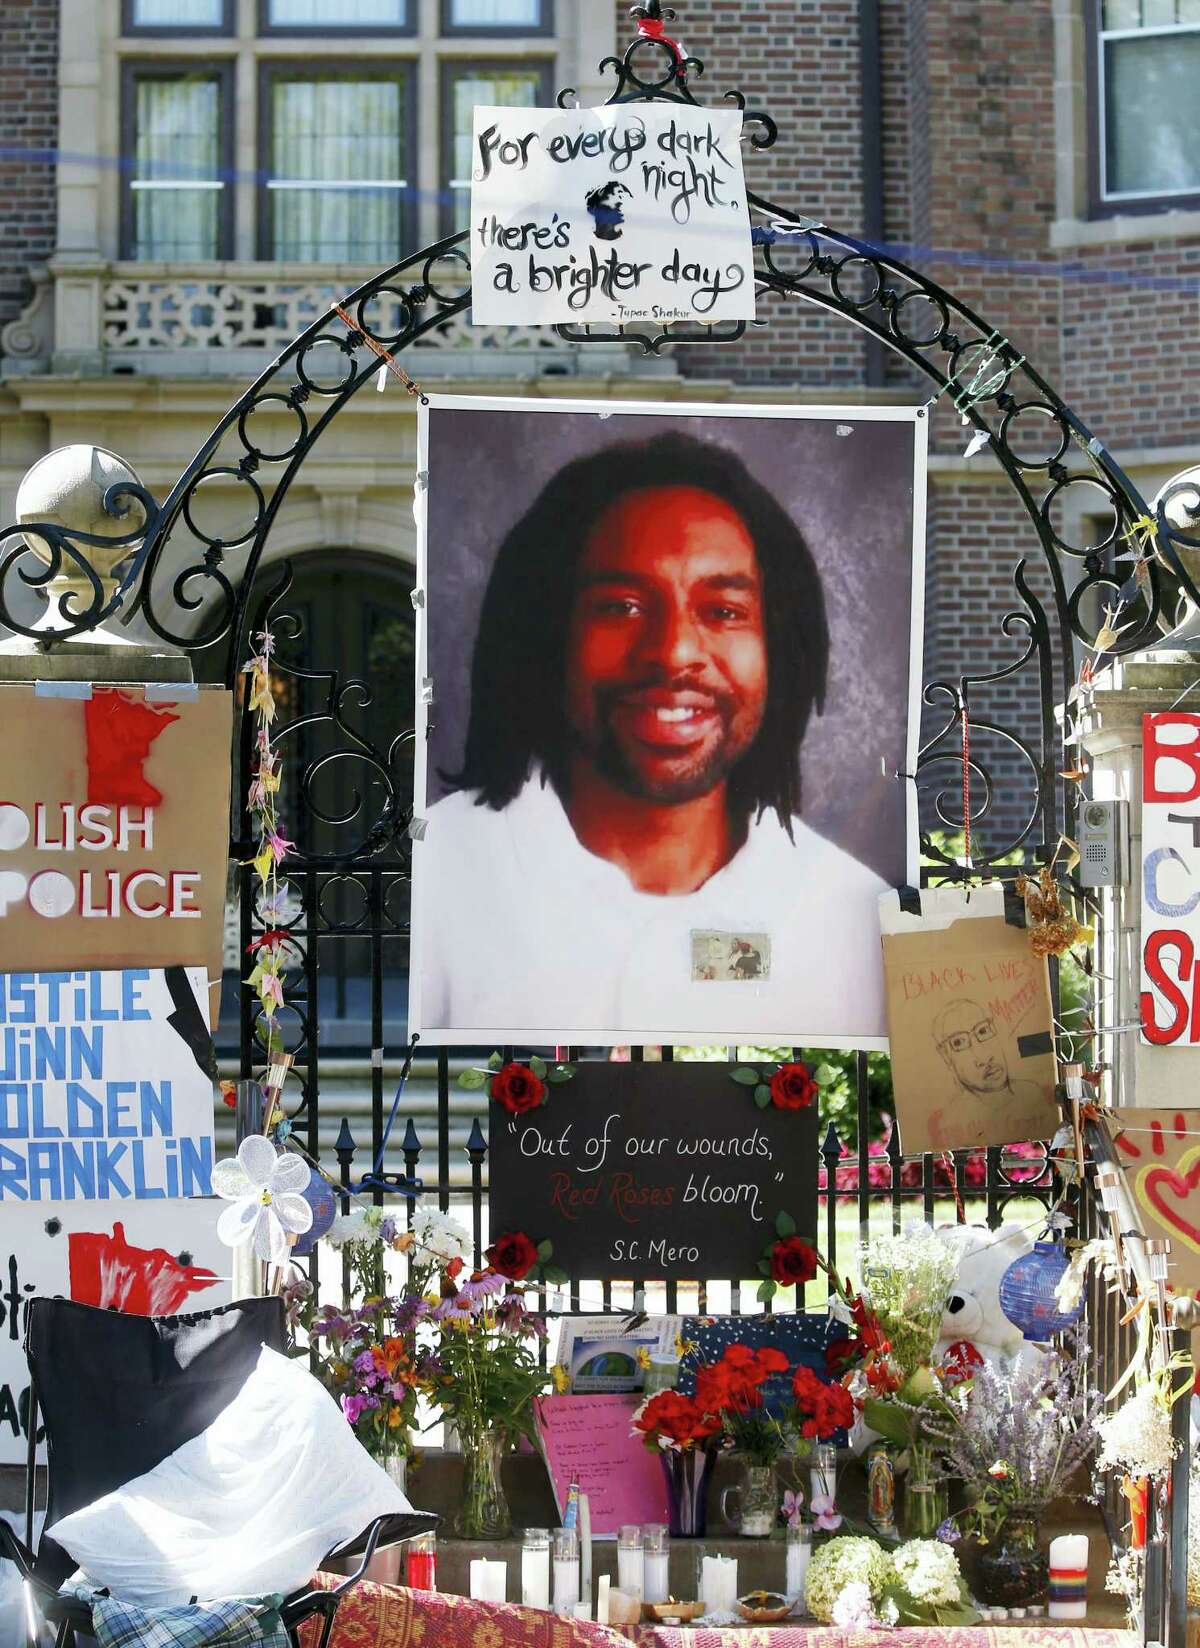 FILE - In this July 25, 2016, file photo, a memorial including a photo of Philando Castile adorns the gate to the governor’s residence in St. Paul, Minn., protesting the July 6, 2016 shooting death of Castile by St. Anthony police officer Jeronimo Yanez. Closing arguments began Monday, June 12, 2017 in in a Yanez’ manslaughter trial in the fatal shooting of Castile.